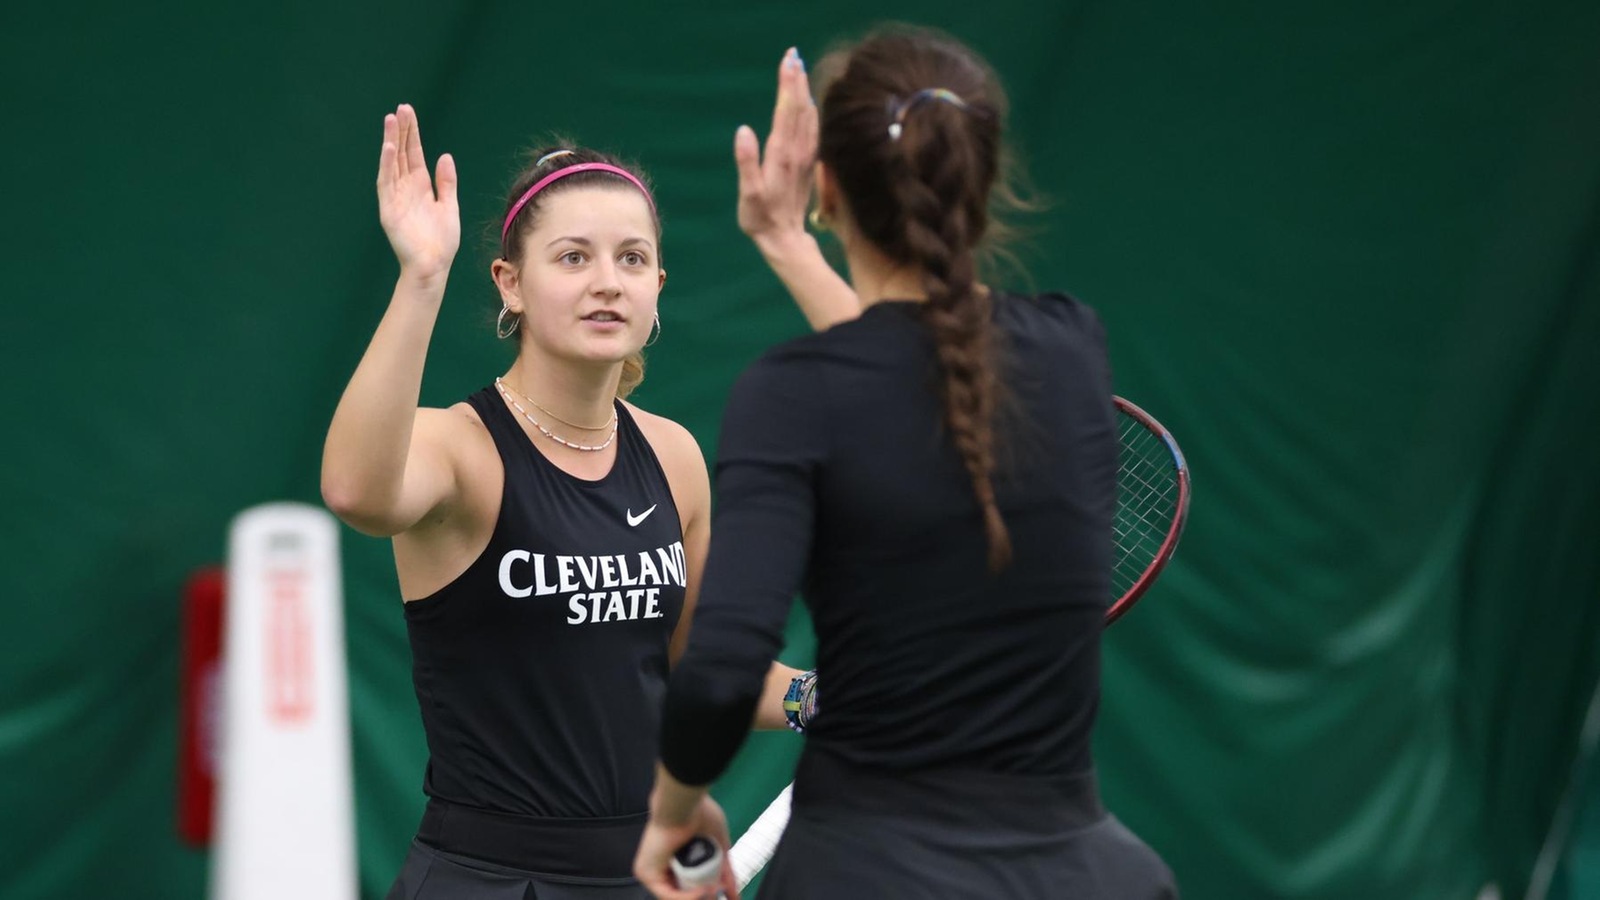 Cleveland State Women’s Tennis Sweeps #HLTennis Weekly Awards